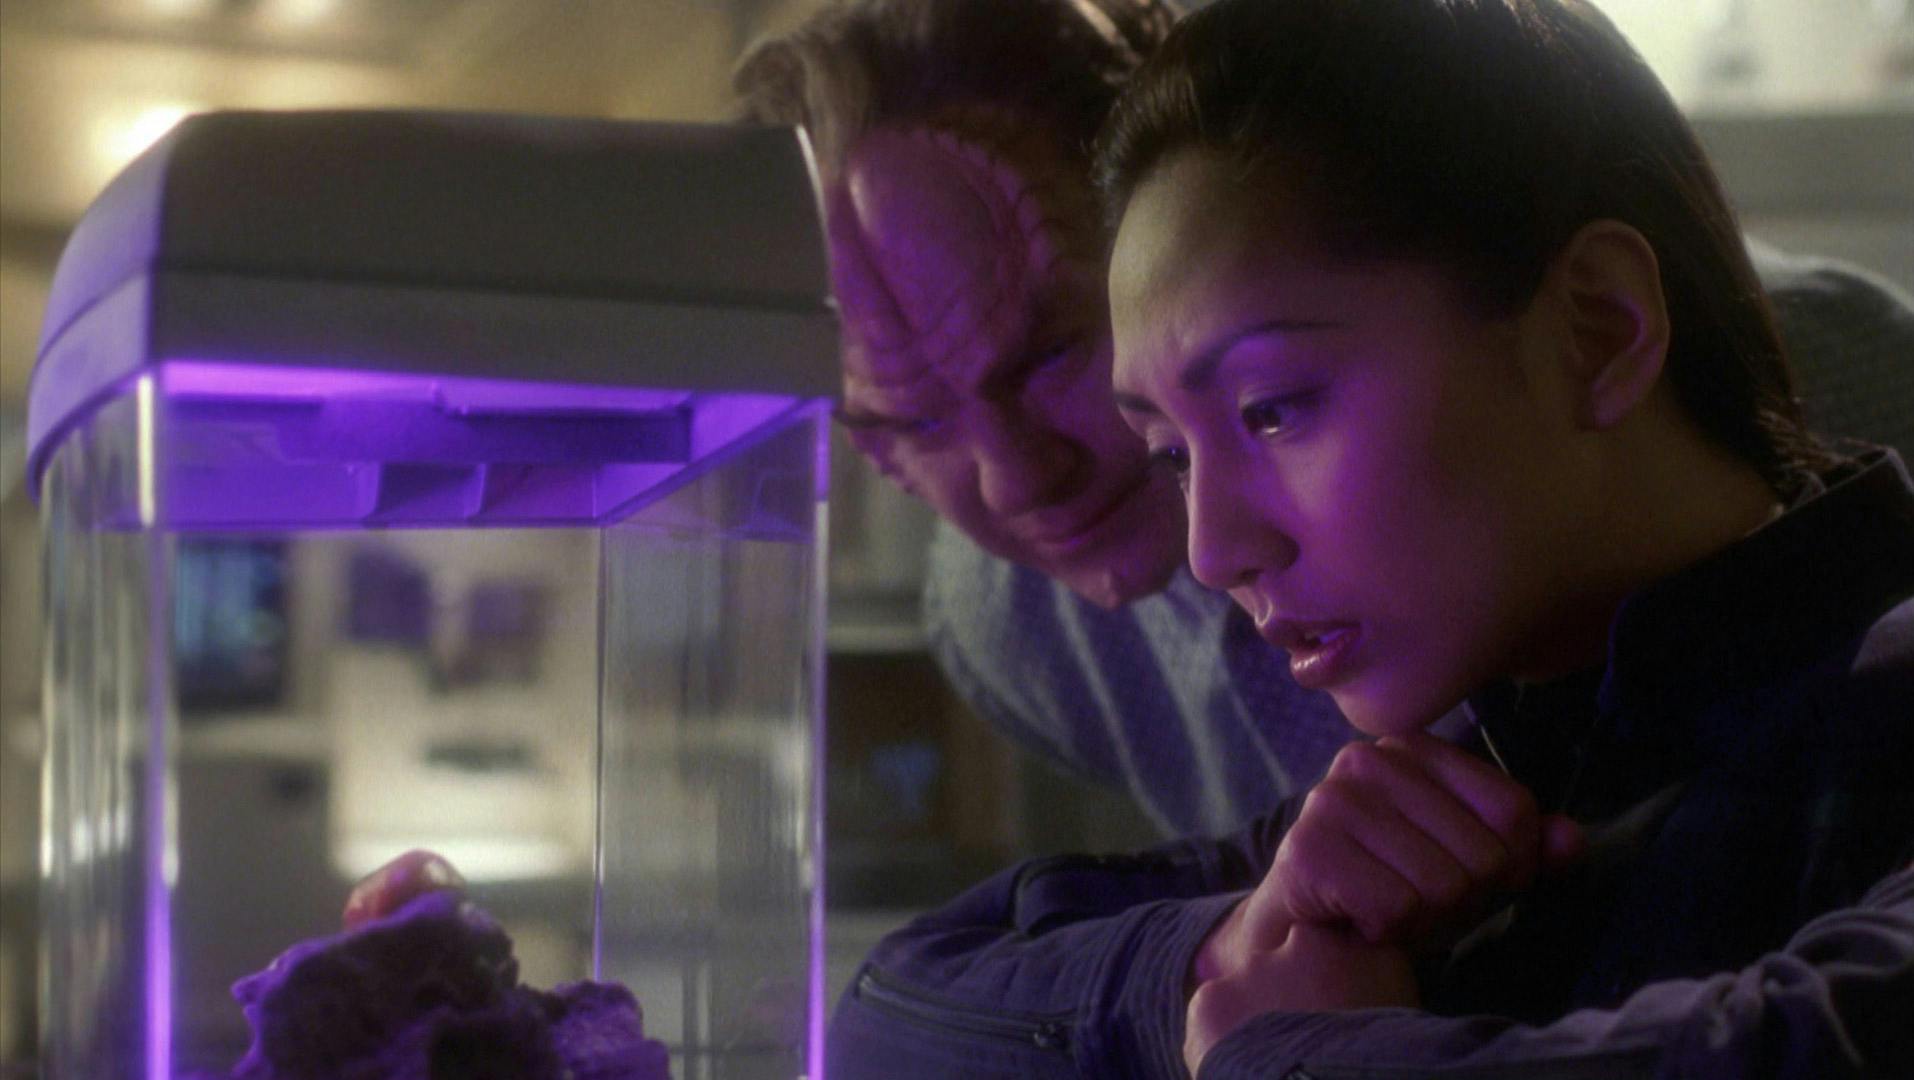 Hoshi Sato worriedly looks over her sick pet, Sluggo, as Phlox looks over at them in Sickbay in 'Fight or Flight'